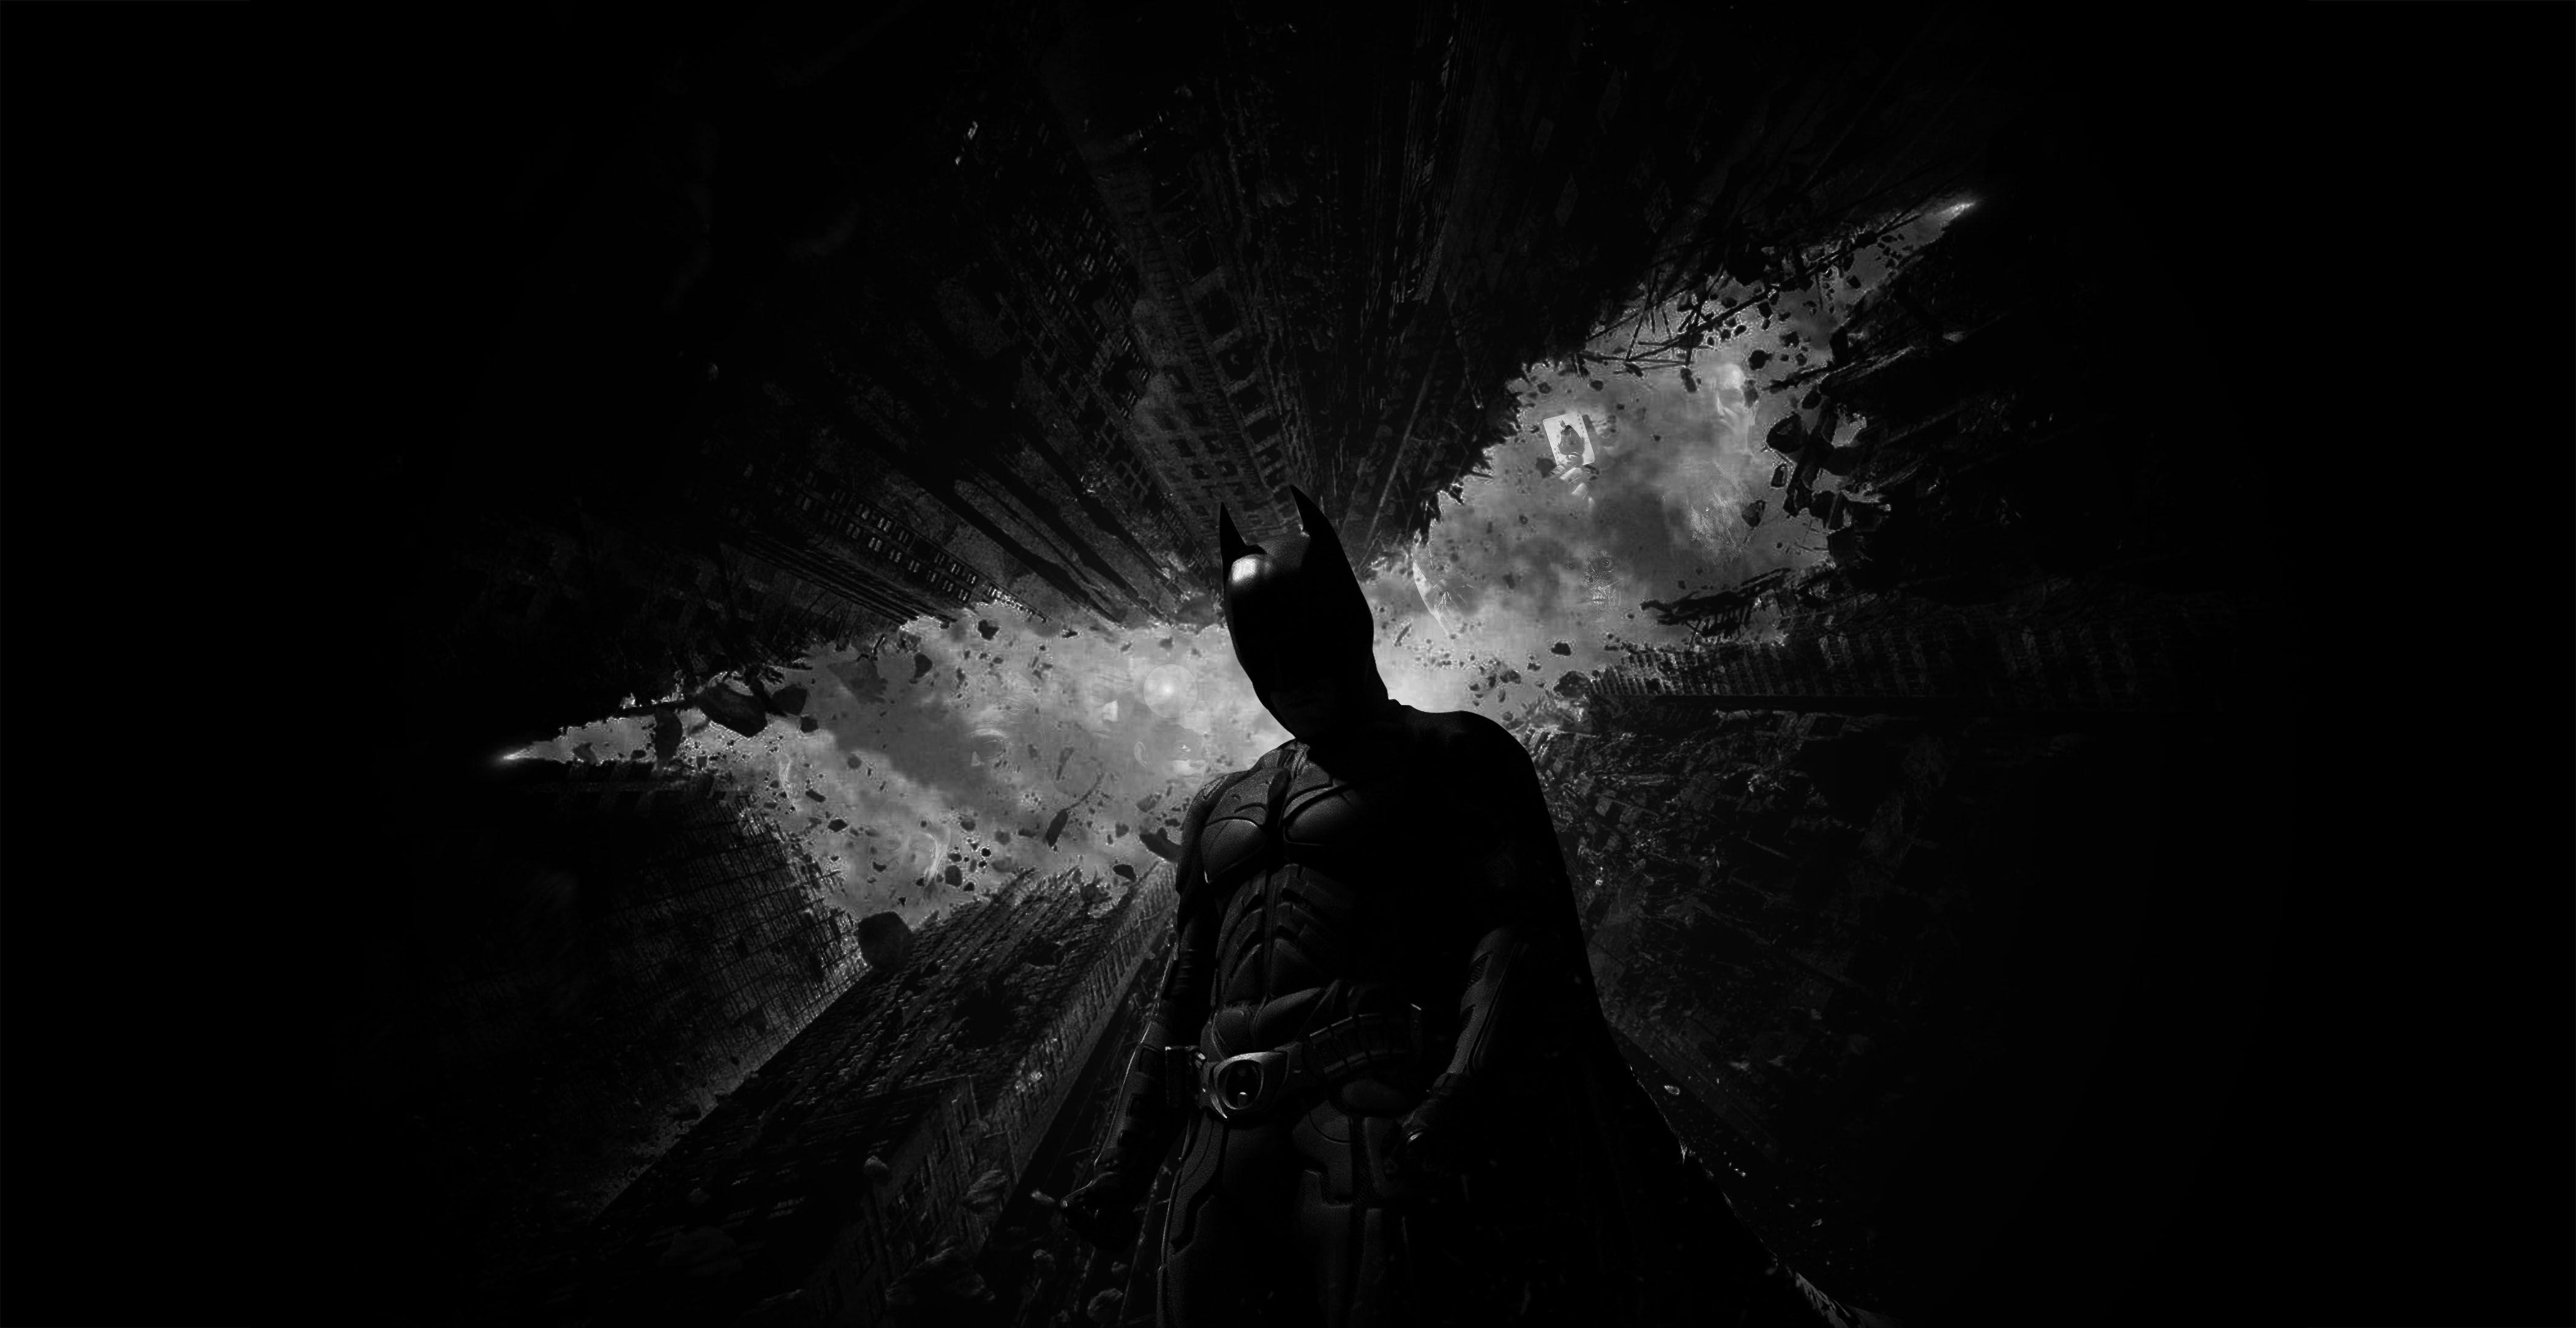 The Dark Knight download the new version